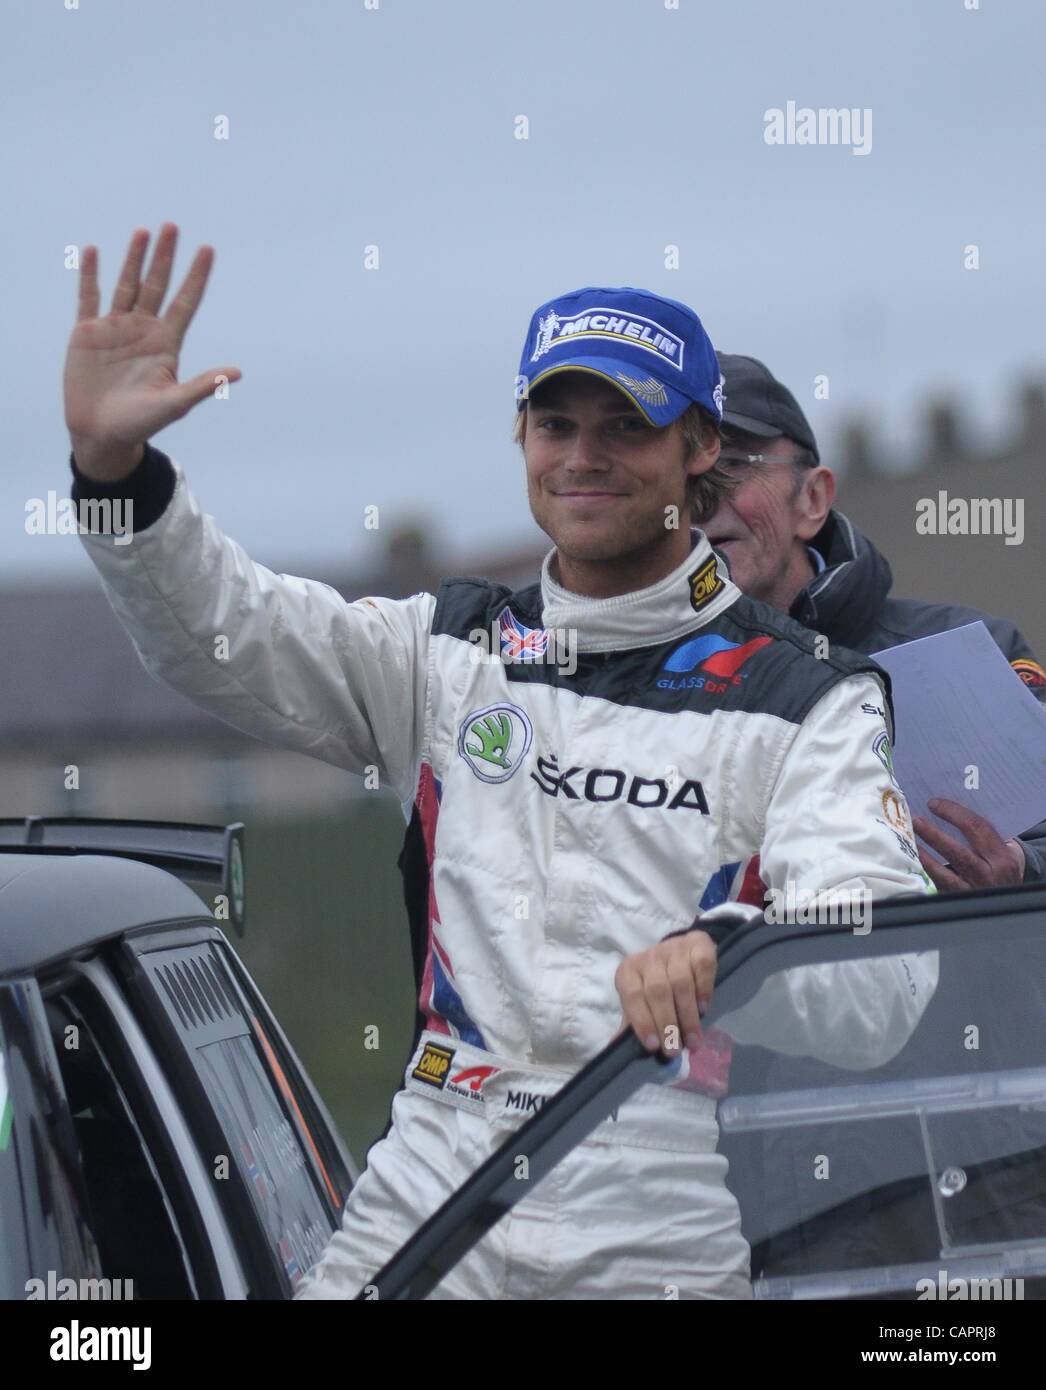 Reigning Intercontinental rally champion Andreas Mikkelsen waves as he finishes second in the Circuit of Ireland International Rally in Armagh, Northern Ireland 7 April 2012. The Circuit of Ireland Rally is the third round of Intercontinental Rally Challenge 2012. Stock Photo